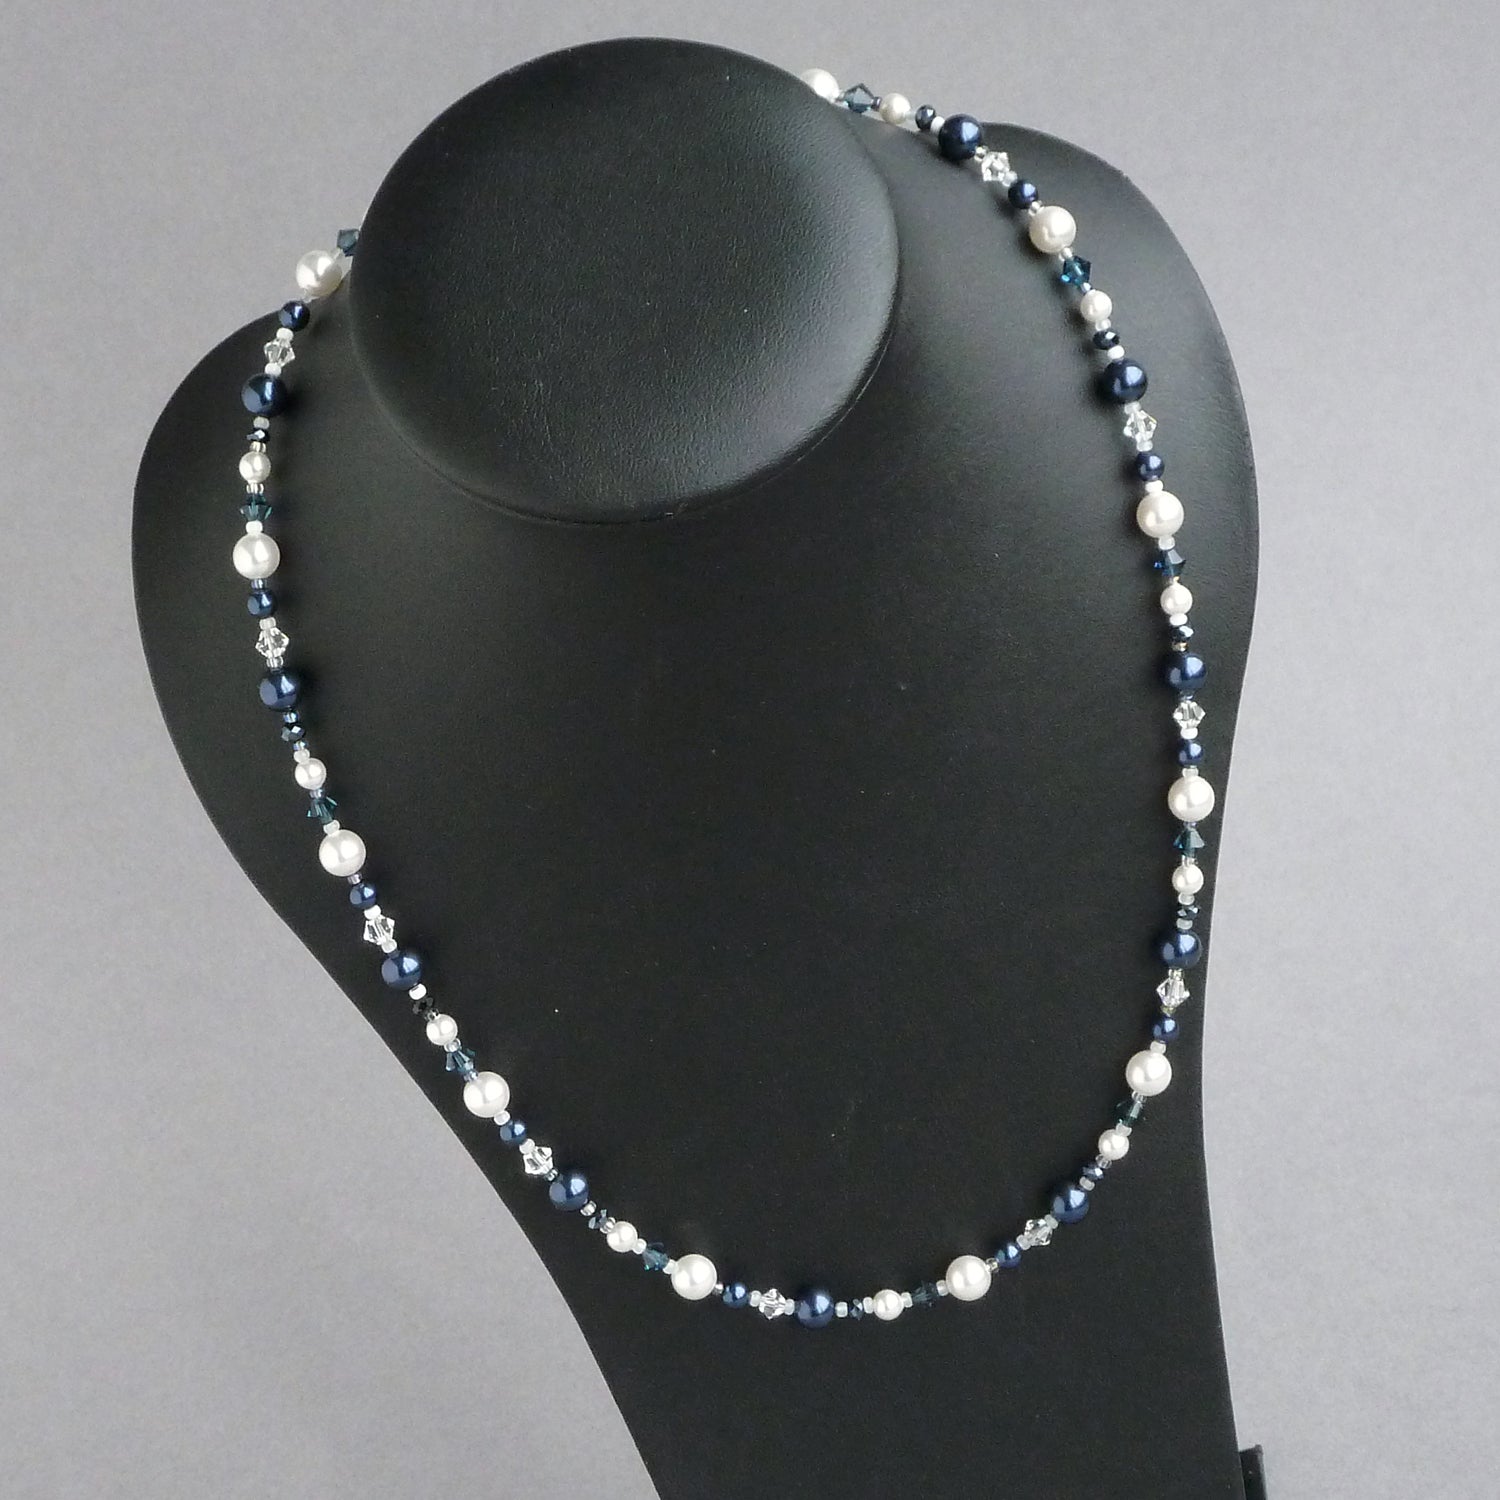 Navy and white pearl necklace